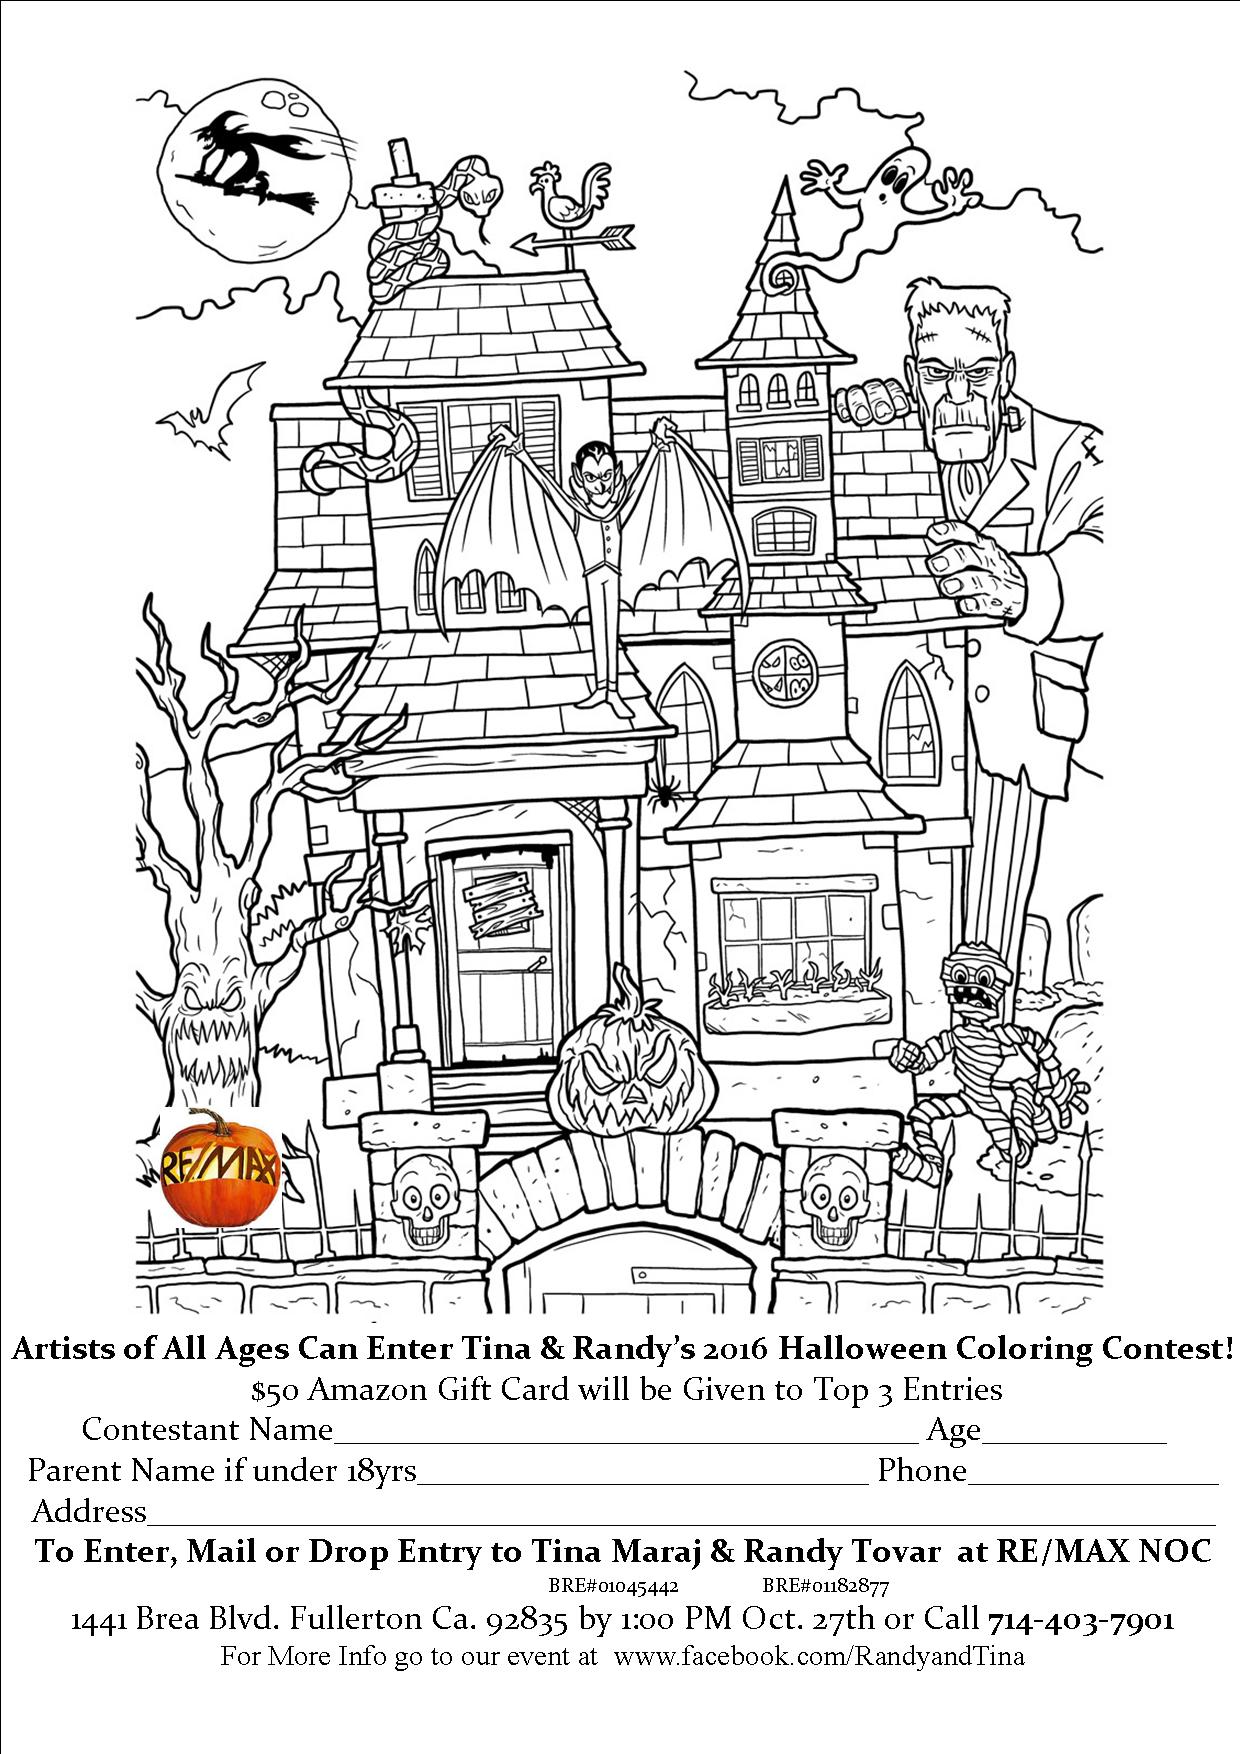 win-50-gift-in-halloween-coloring-contest-by-tina-maraj